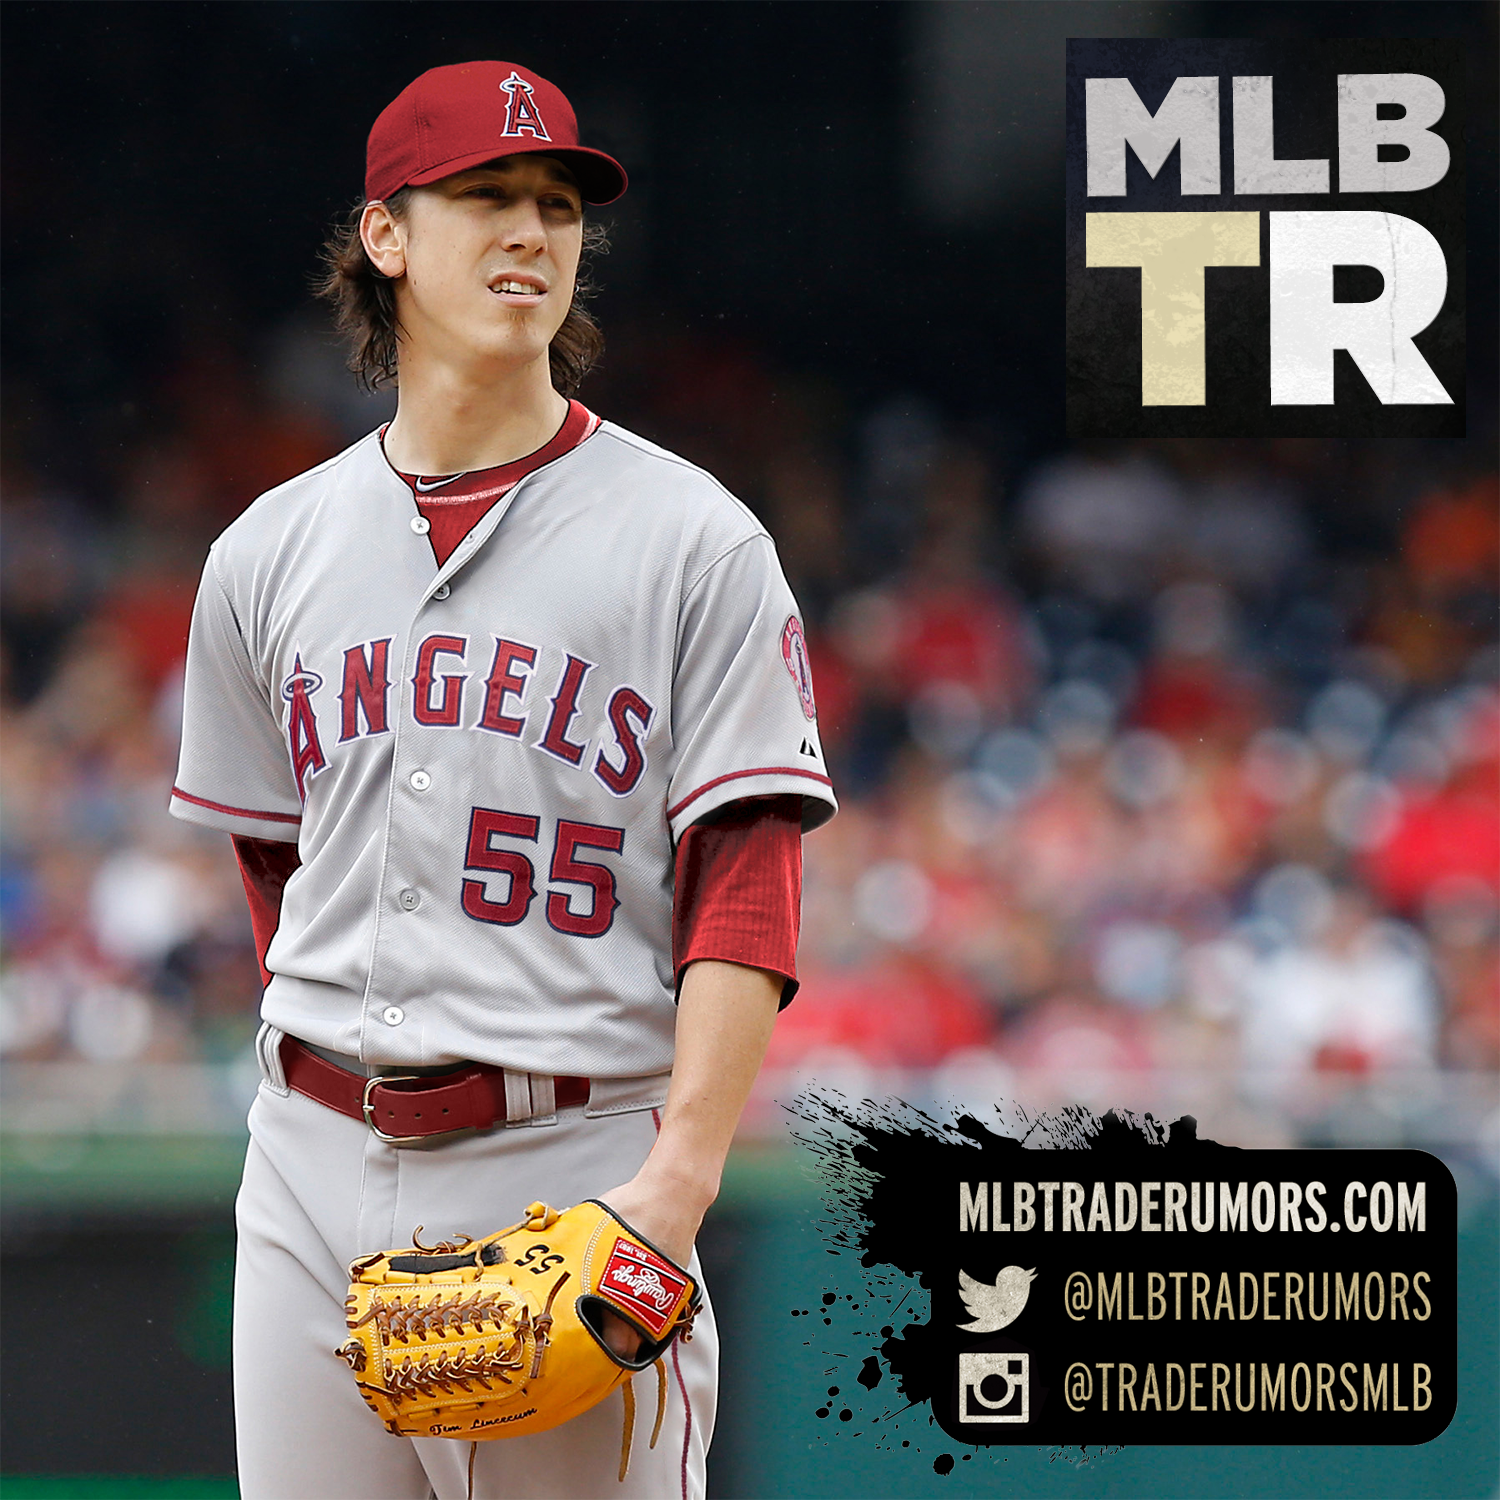 Tim Lincecum, multiple Cy Young winner, remains underground